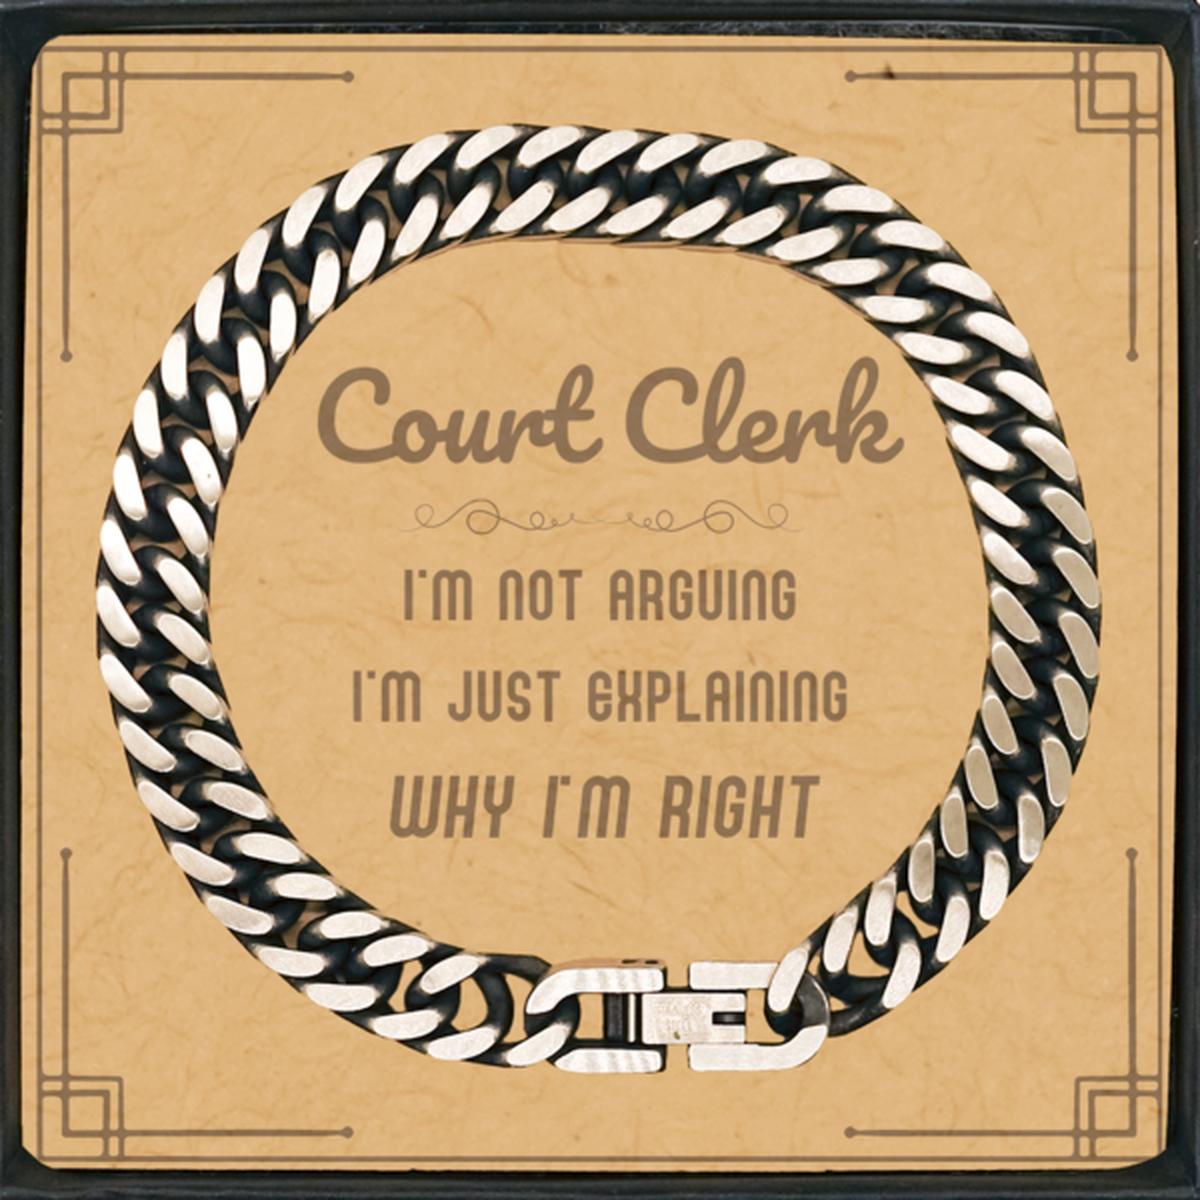 Court Clerk I'm not Arguing. I'm Just Explaining Why I'm RIGHT Cuban Link Chain Bracelet, Funny Saying Quote Court Clerk Gifts For Court Clerk Message Card Graduation Birthday Christmas Gifts for Men Women Coworker